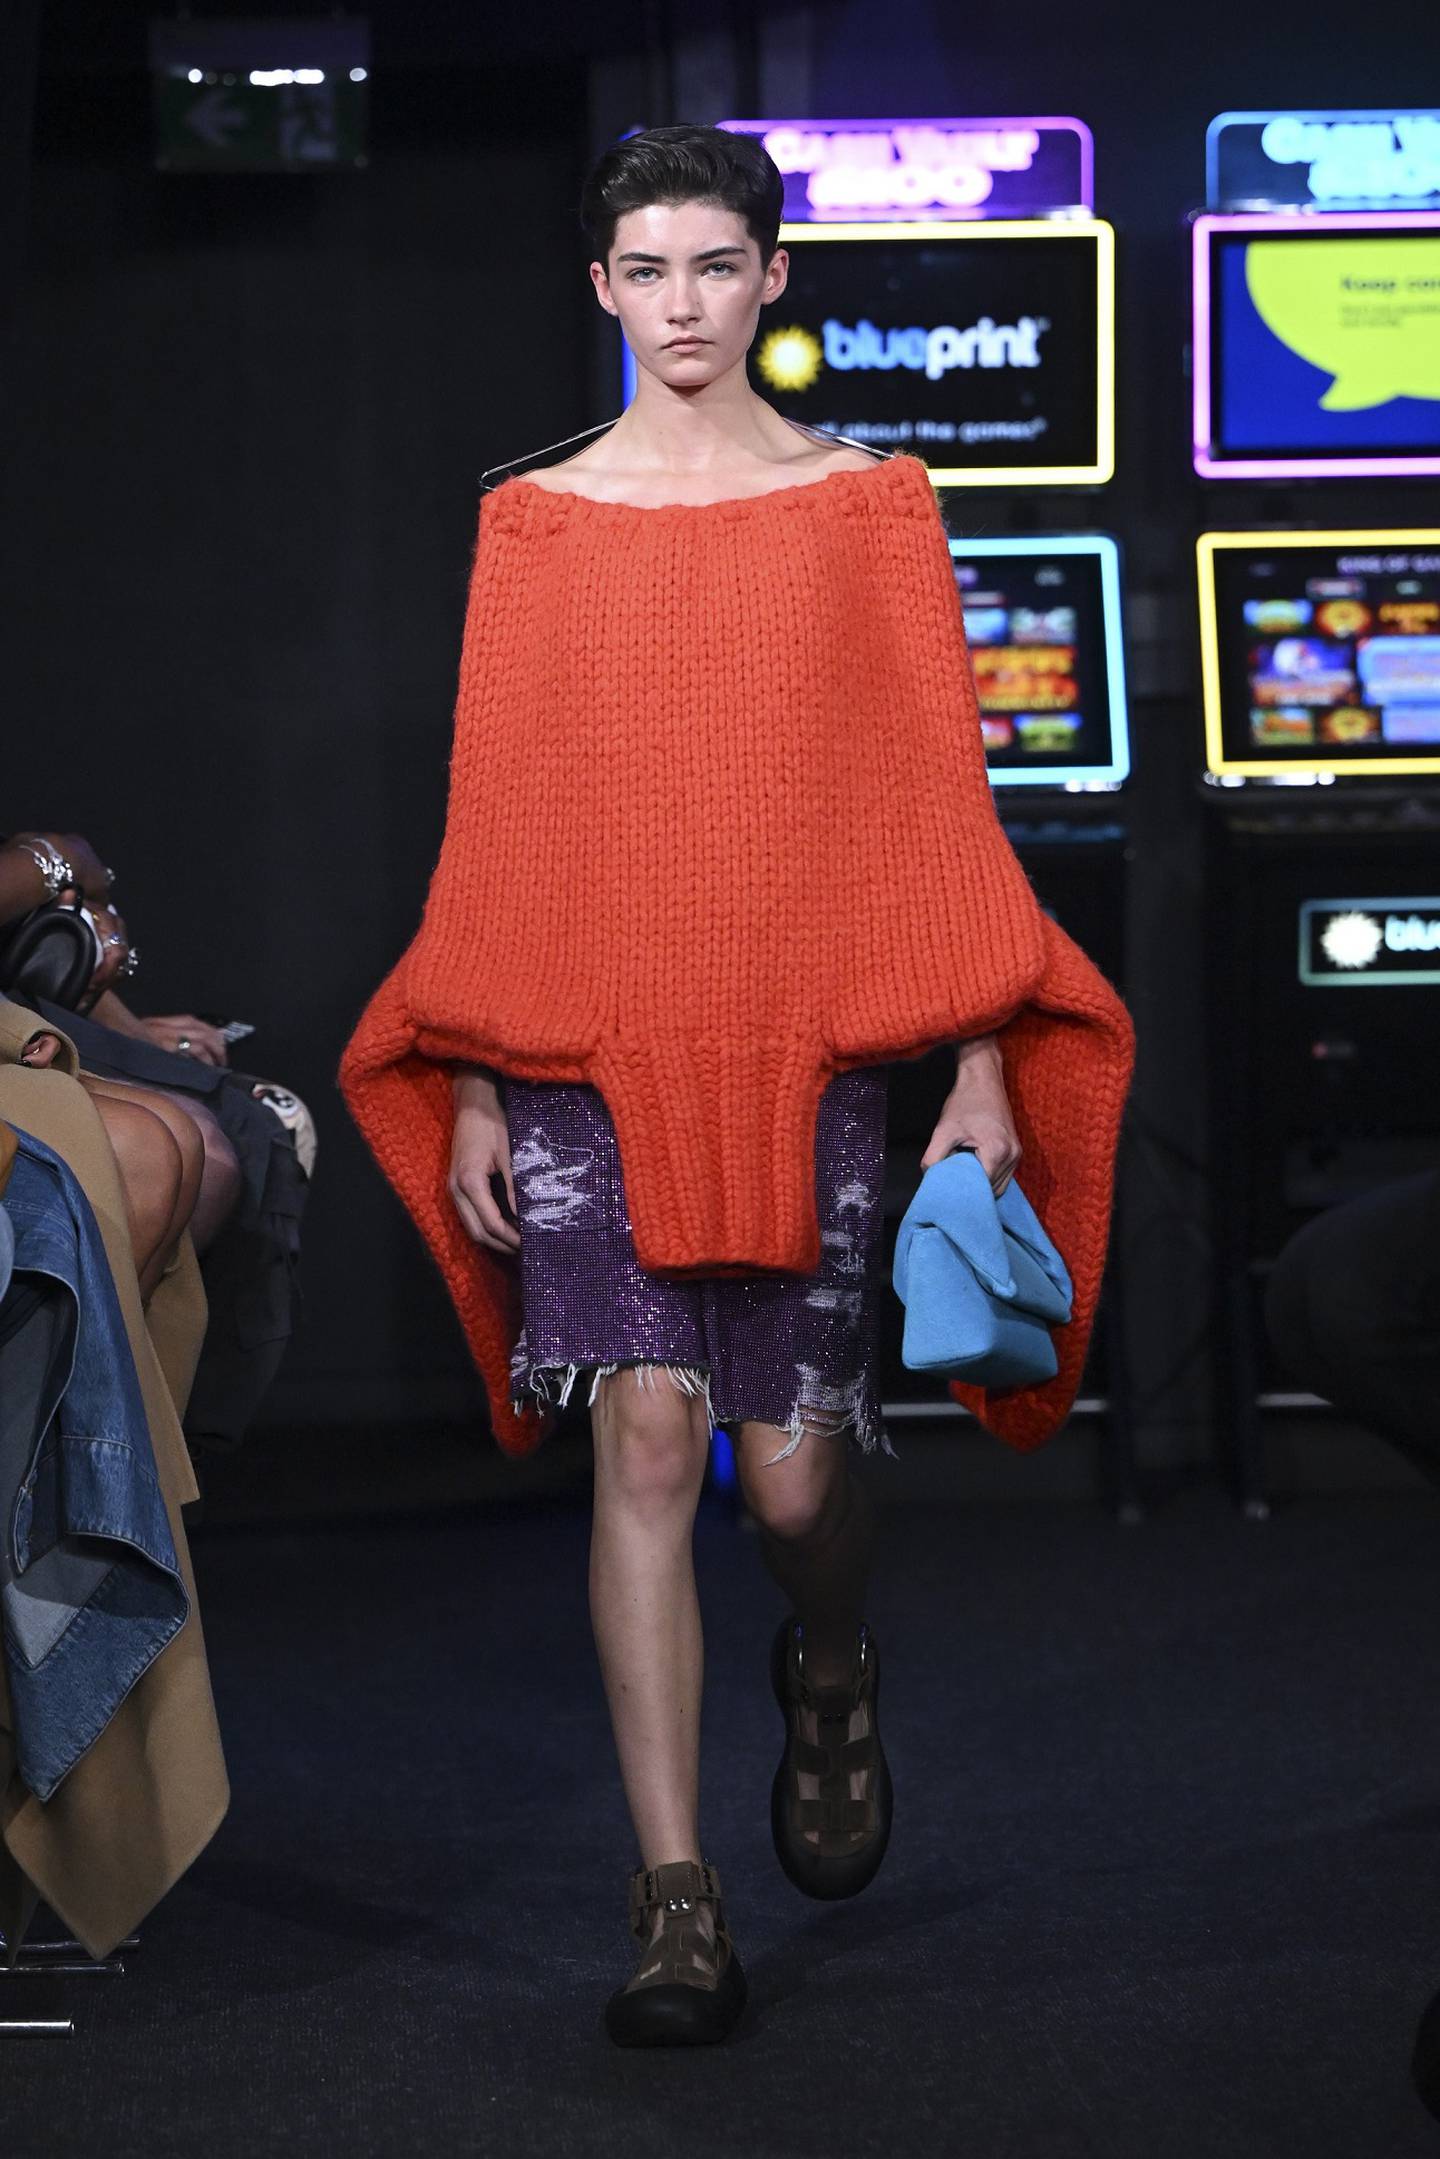 JW Anderson sent an upside-down blouse as a dress, with a coat hanger around the model's neck.  Photo: JW Anderson